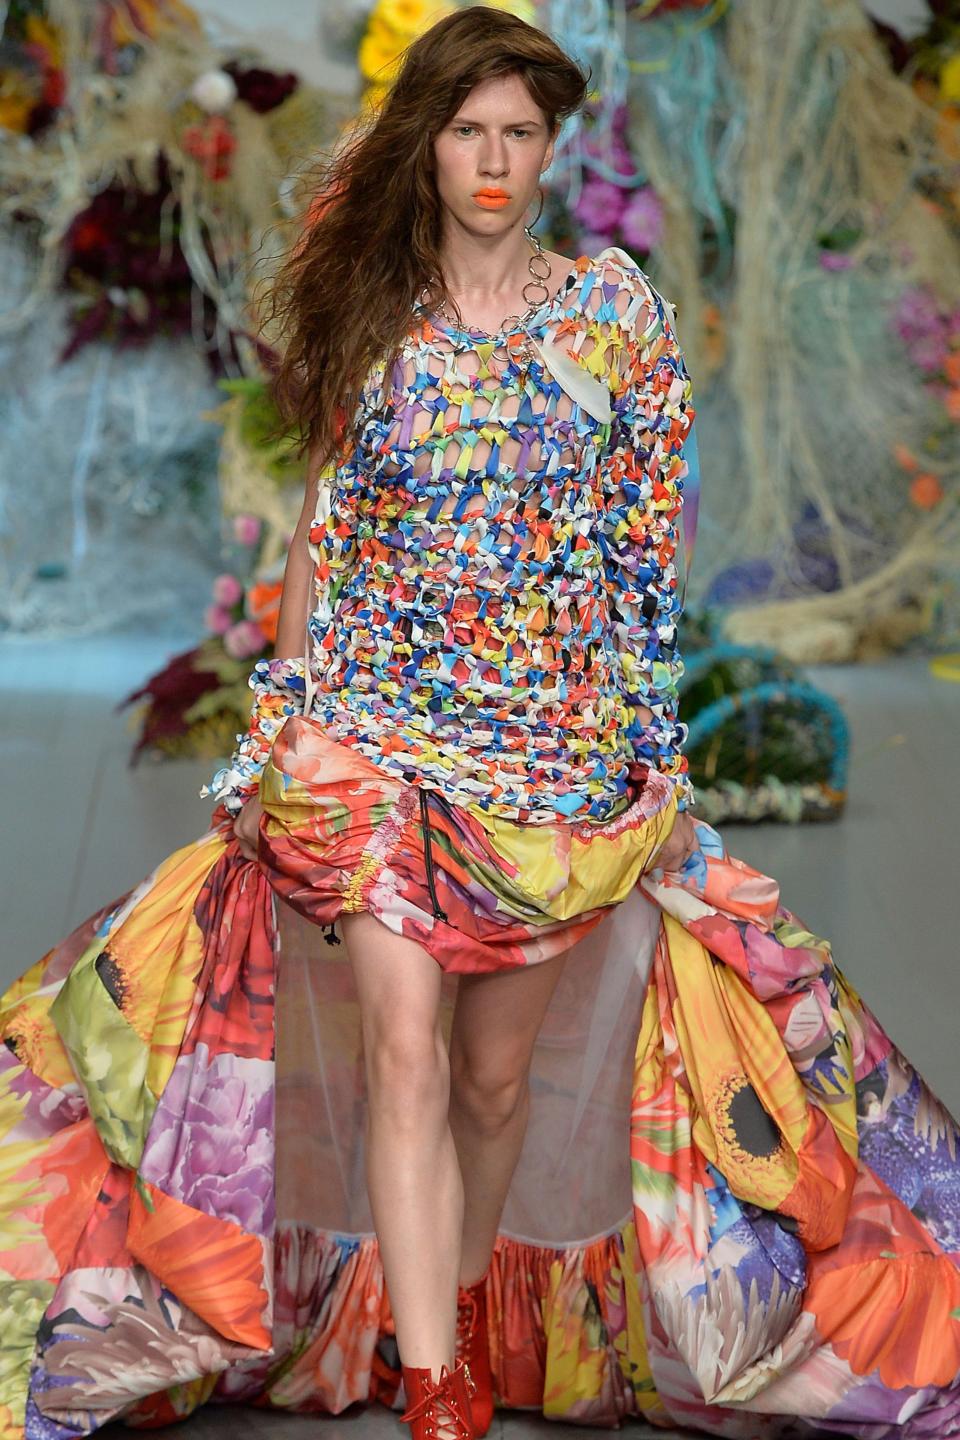 Fyodor Golan Splashes Down in London With an Ocean-Centric and Awareness-Raising Spring Collection